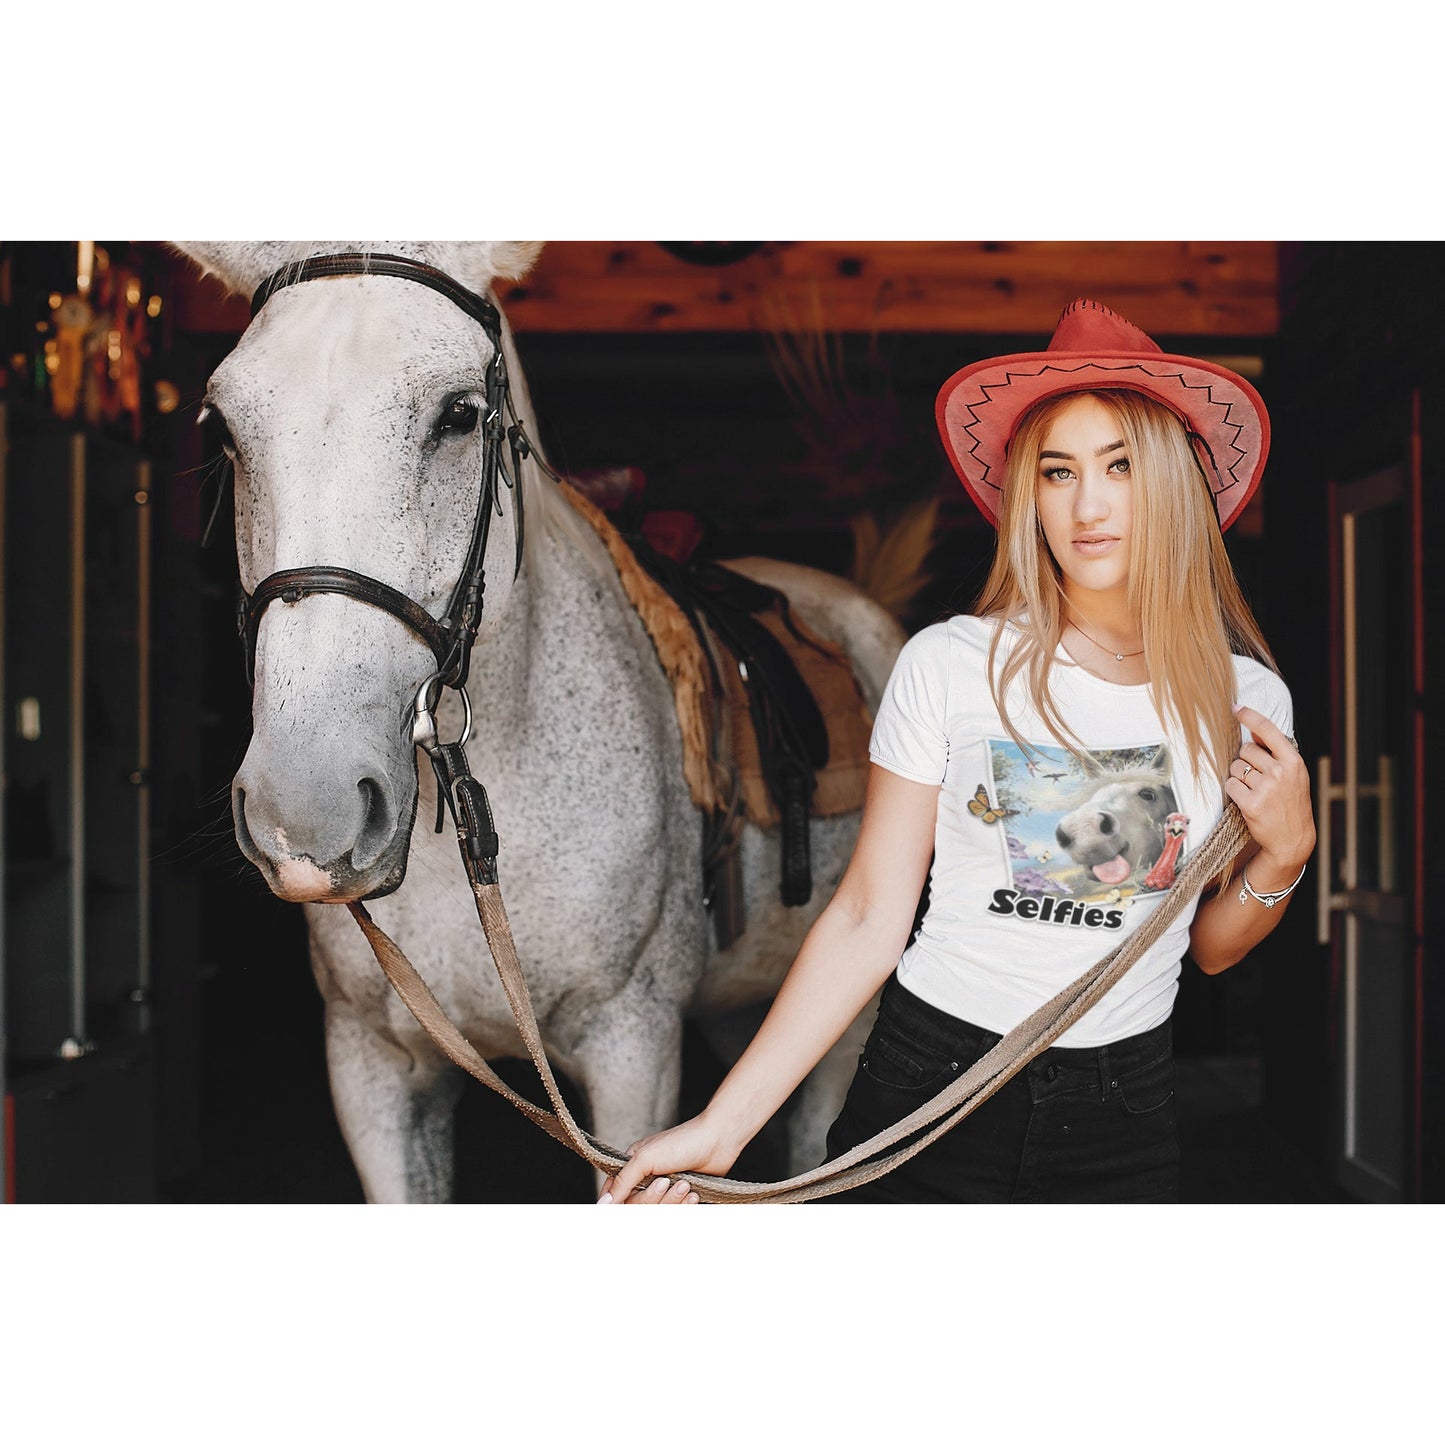 Girl wearing Solar Actived Horse "Selfie" Tee shirt that go from Black & White to Full Color in the sun.